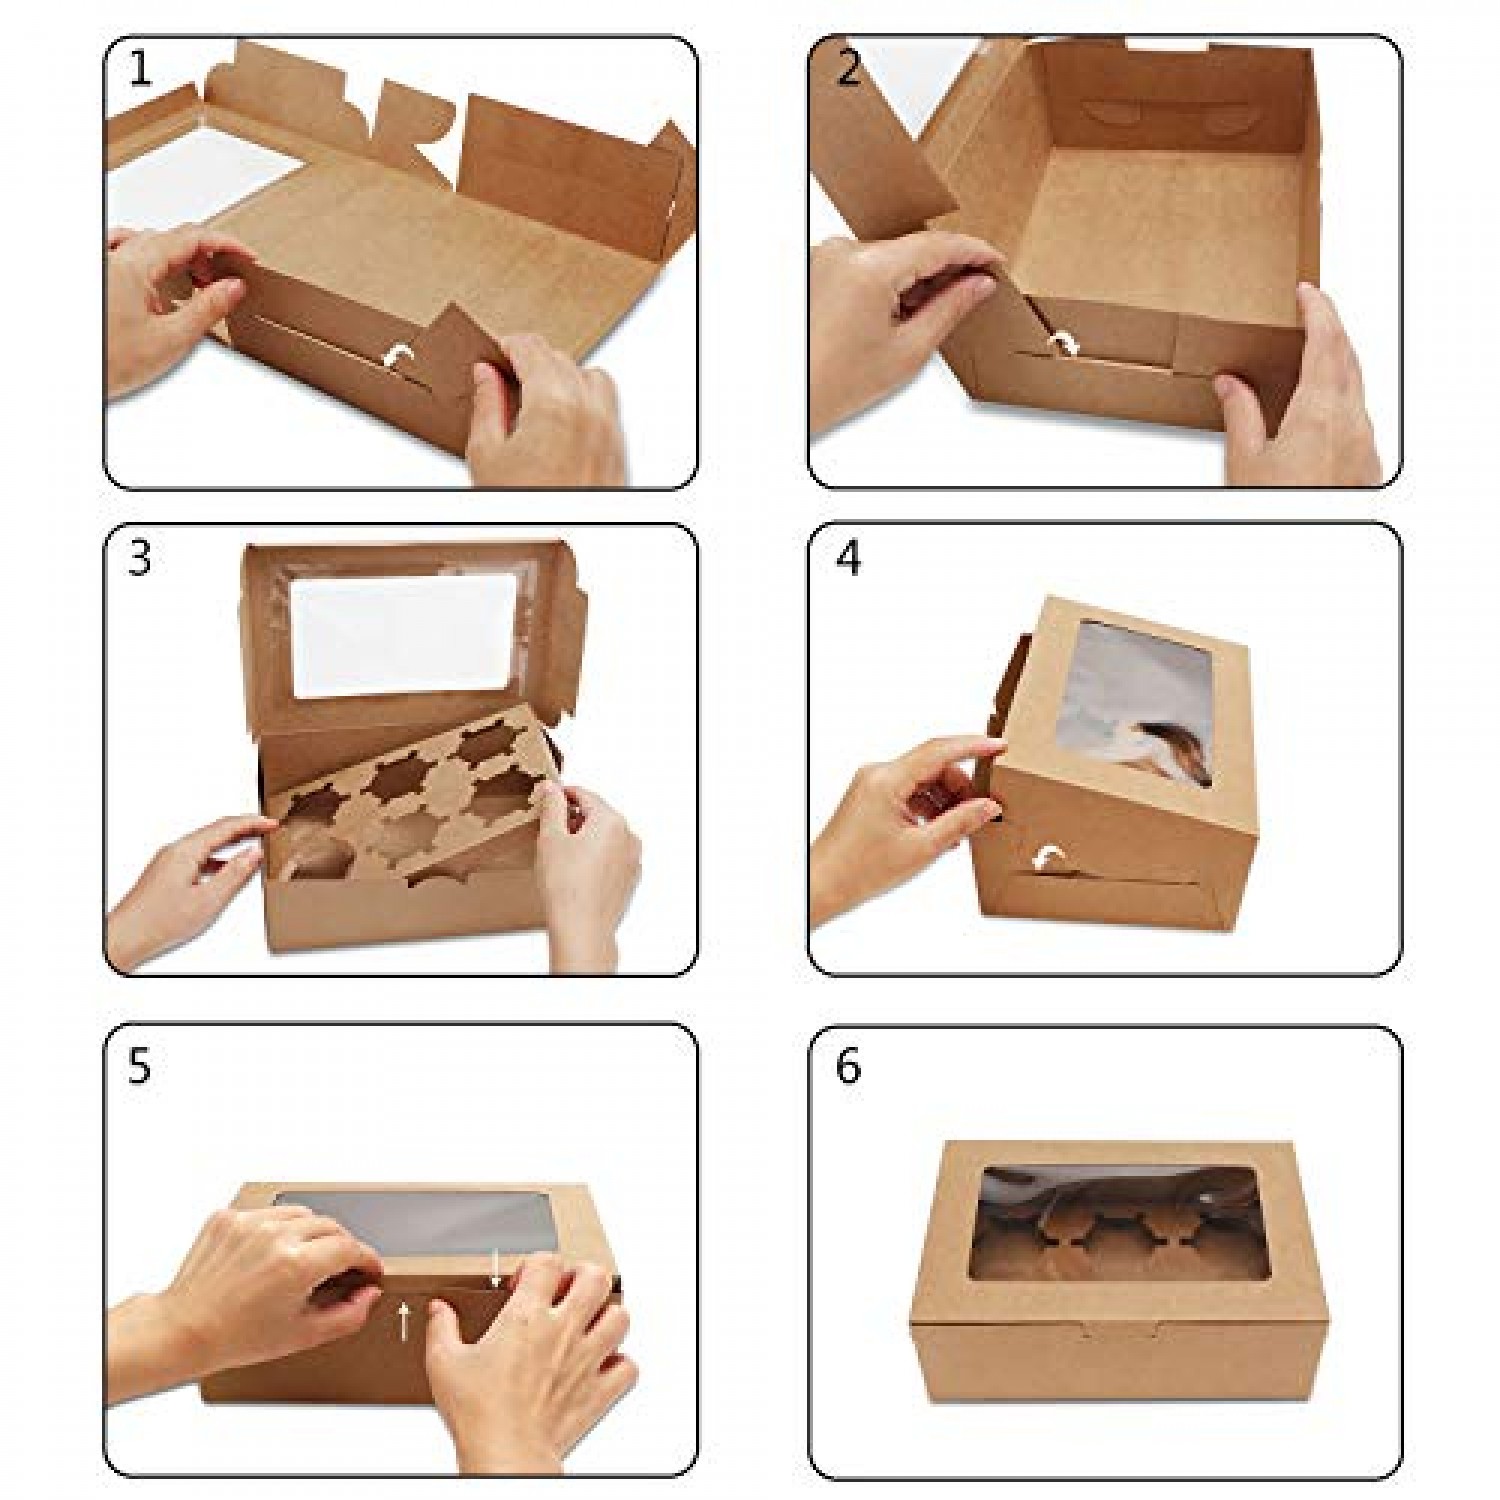 15 Packs Kraft Cupcake Boxes,Cupcake Carrier,Cupcake Display,Cupcake Container,Kraft Bakery Boxes with Inserts and Display Window Holds 6 Standard Cupcakes Muffins 